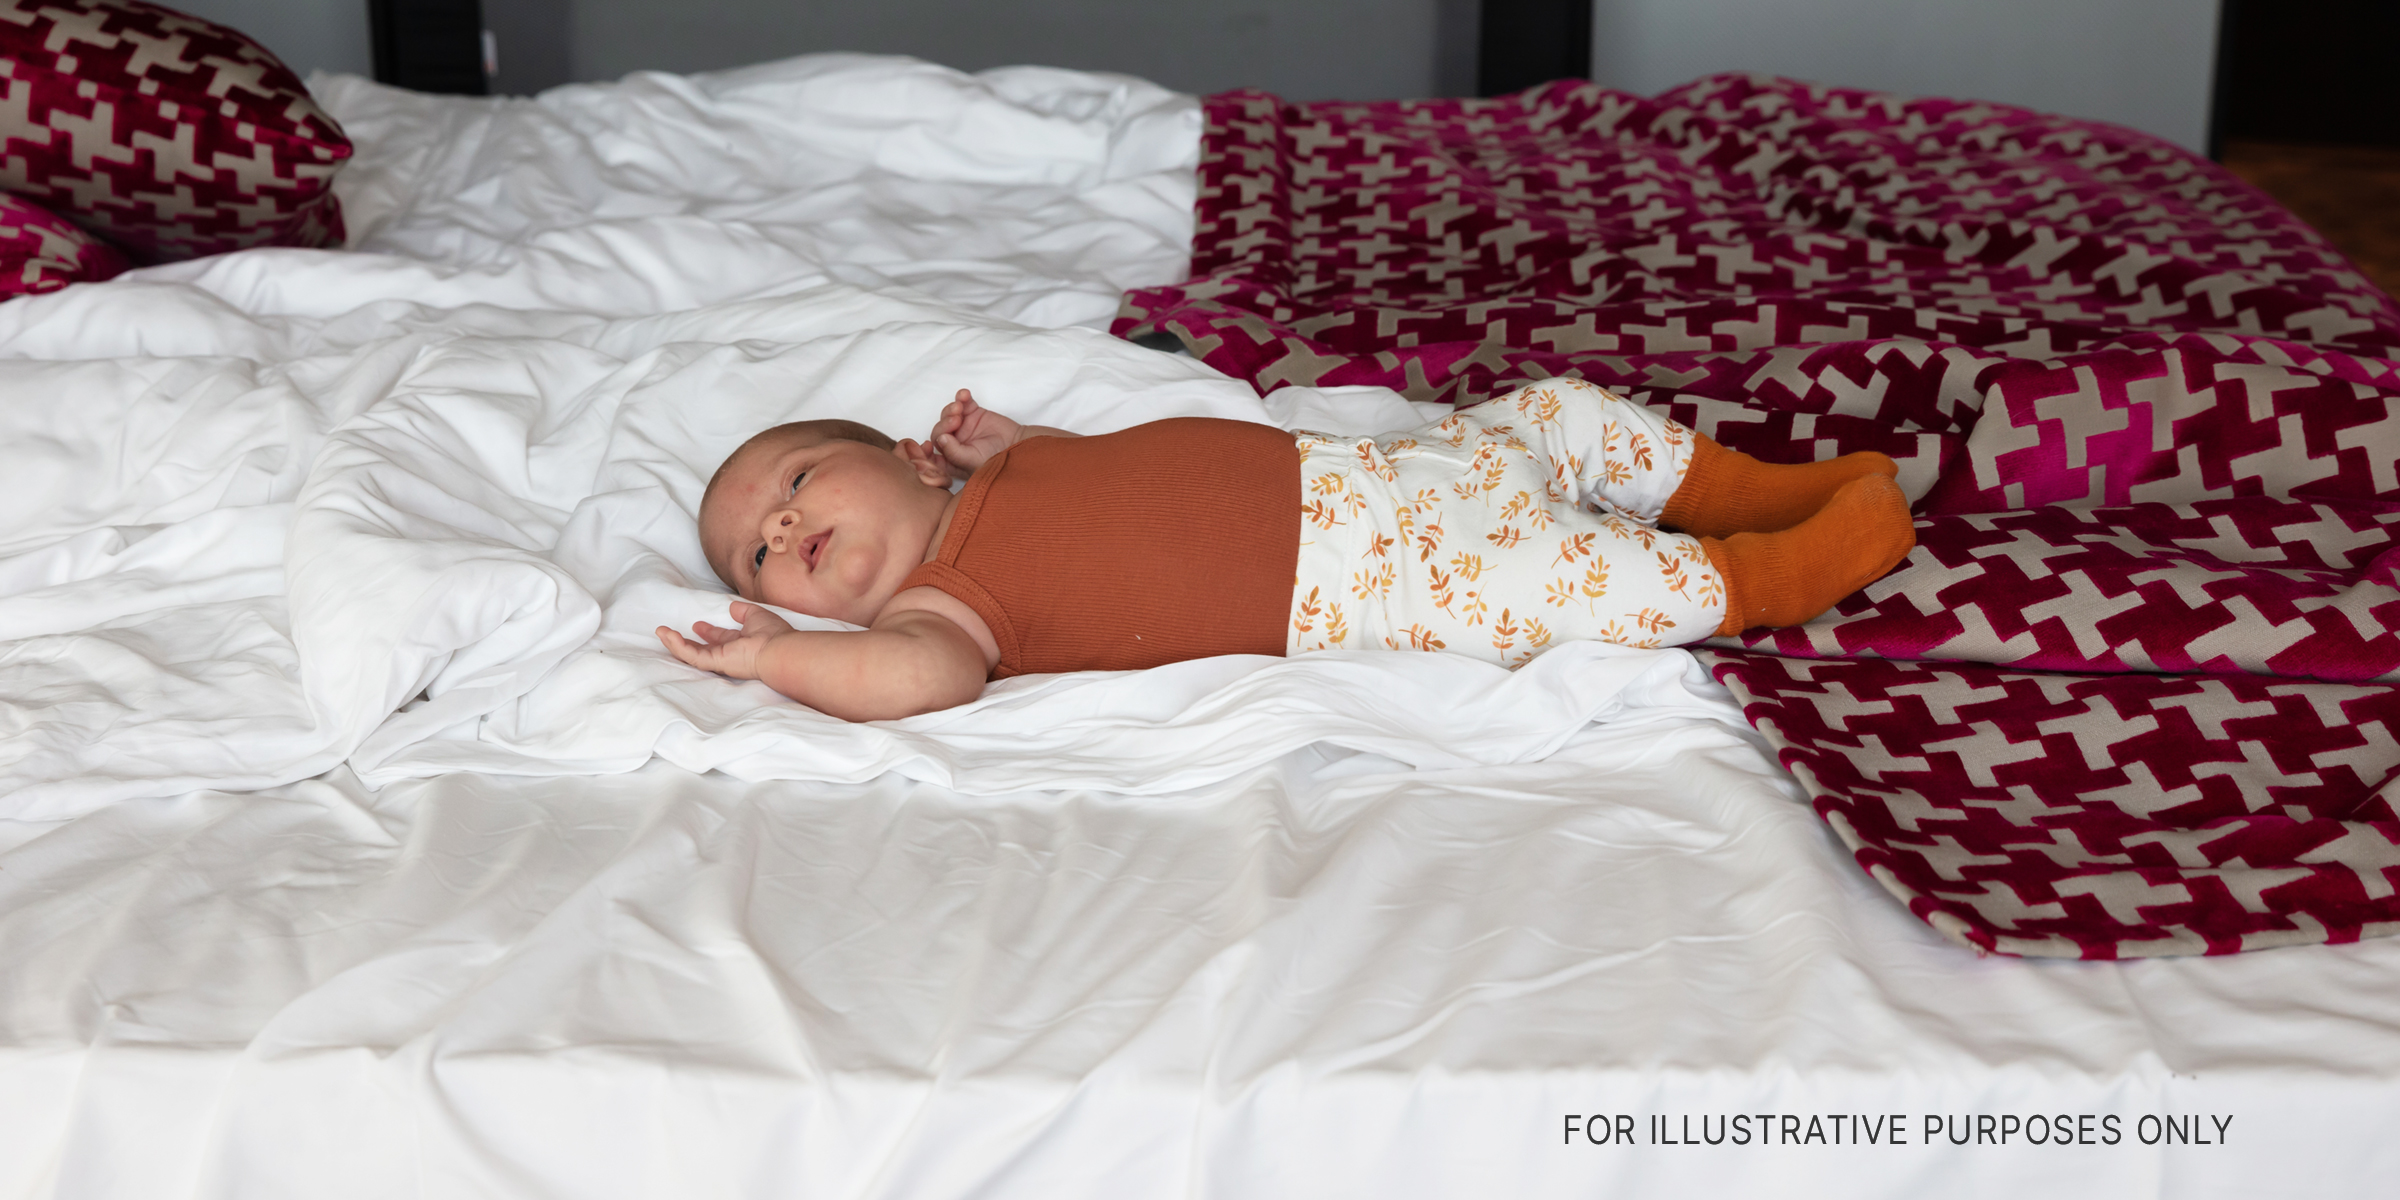 Baby lying in bed | Source: Shutterstock